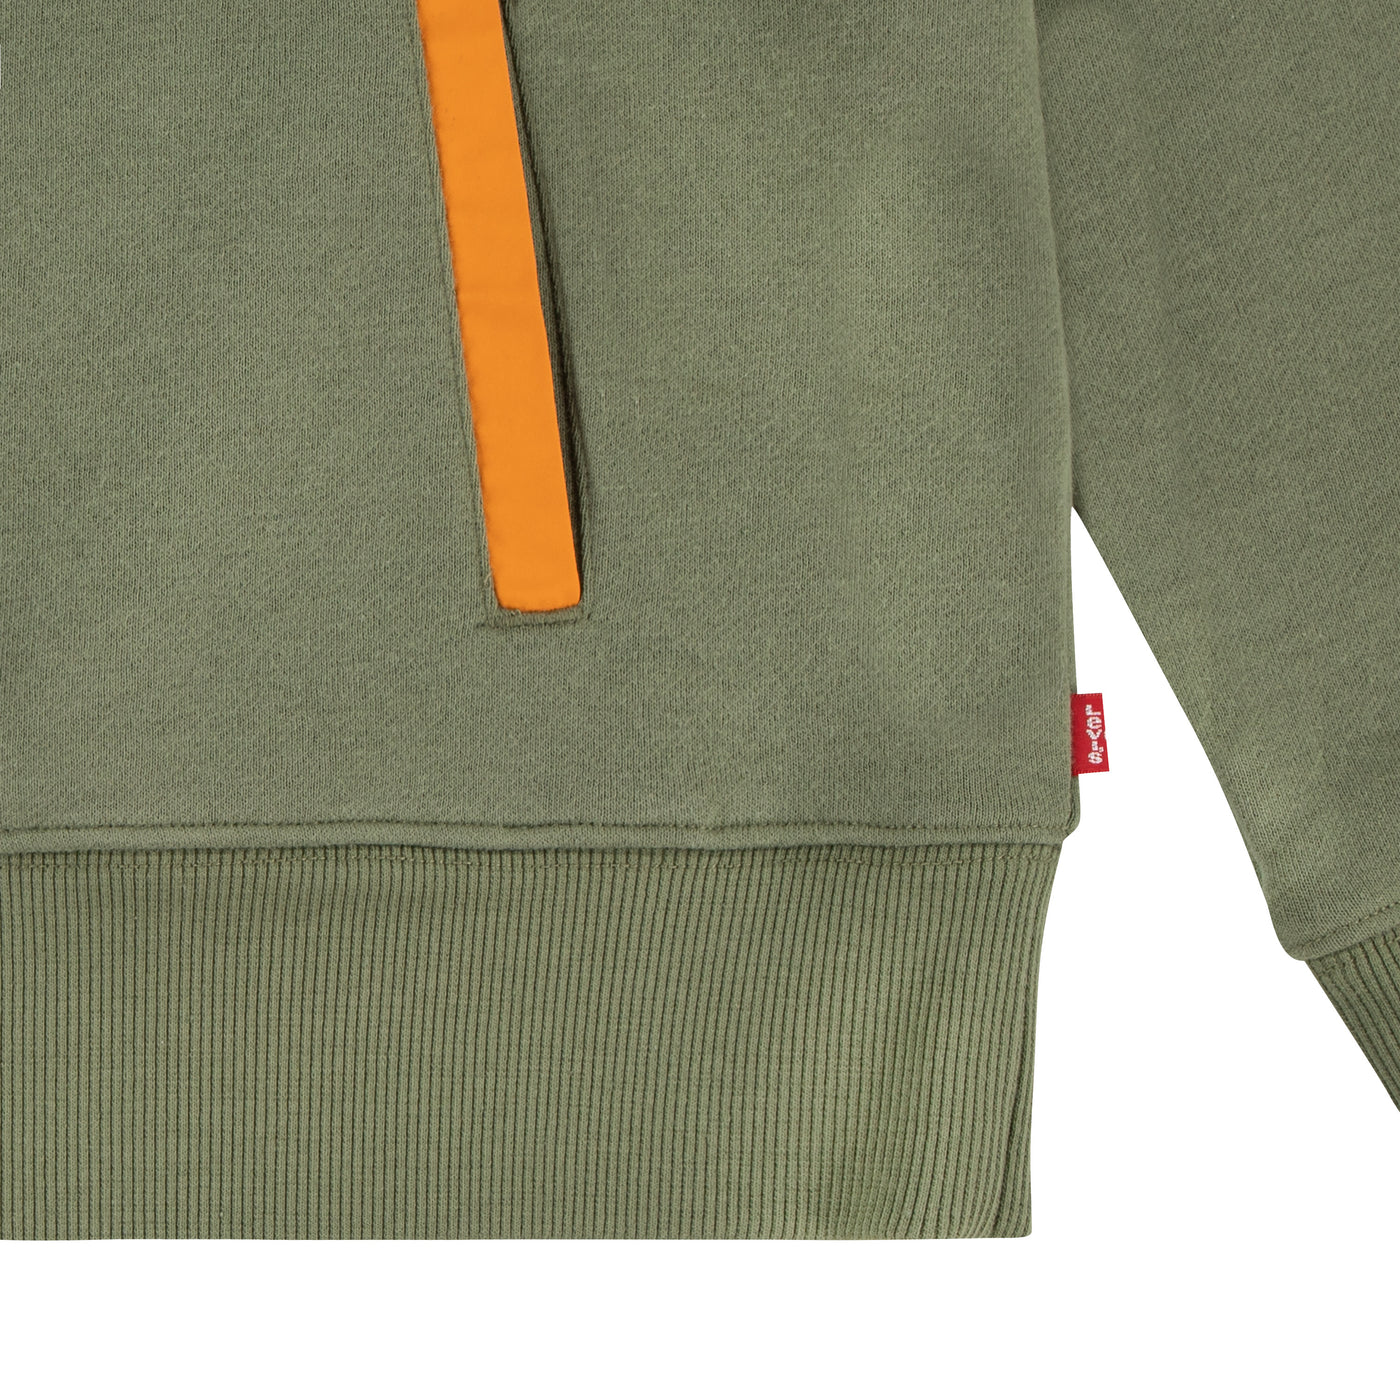 Levi'S Olive Utility Pullover Hoodie